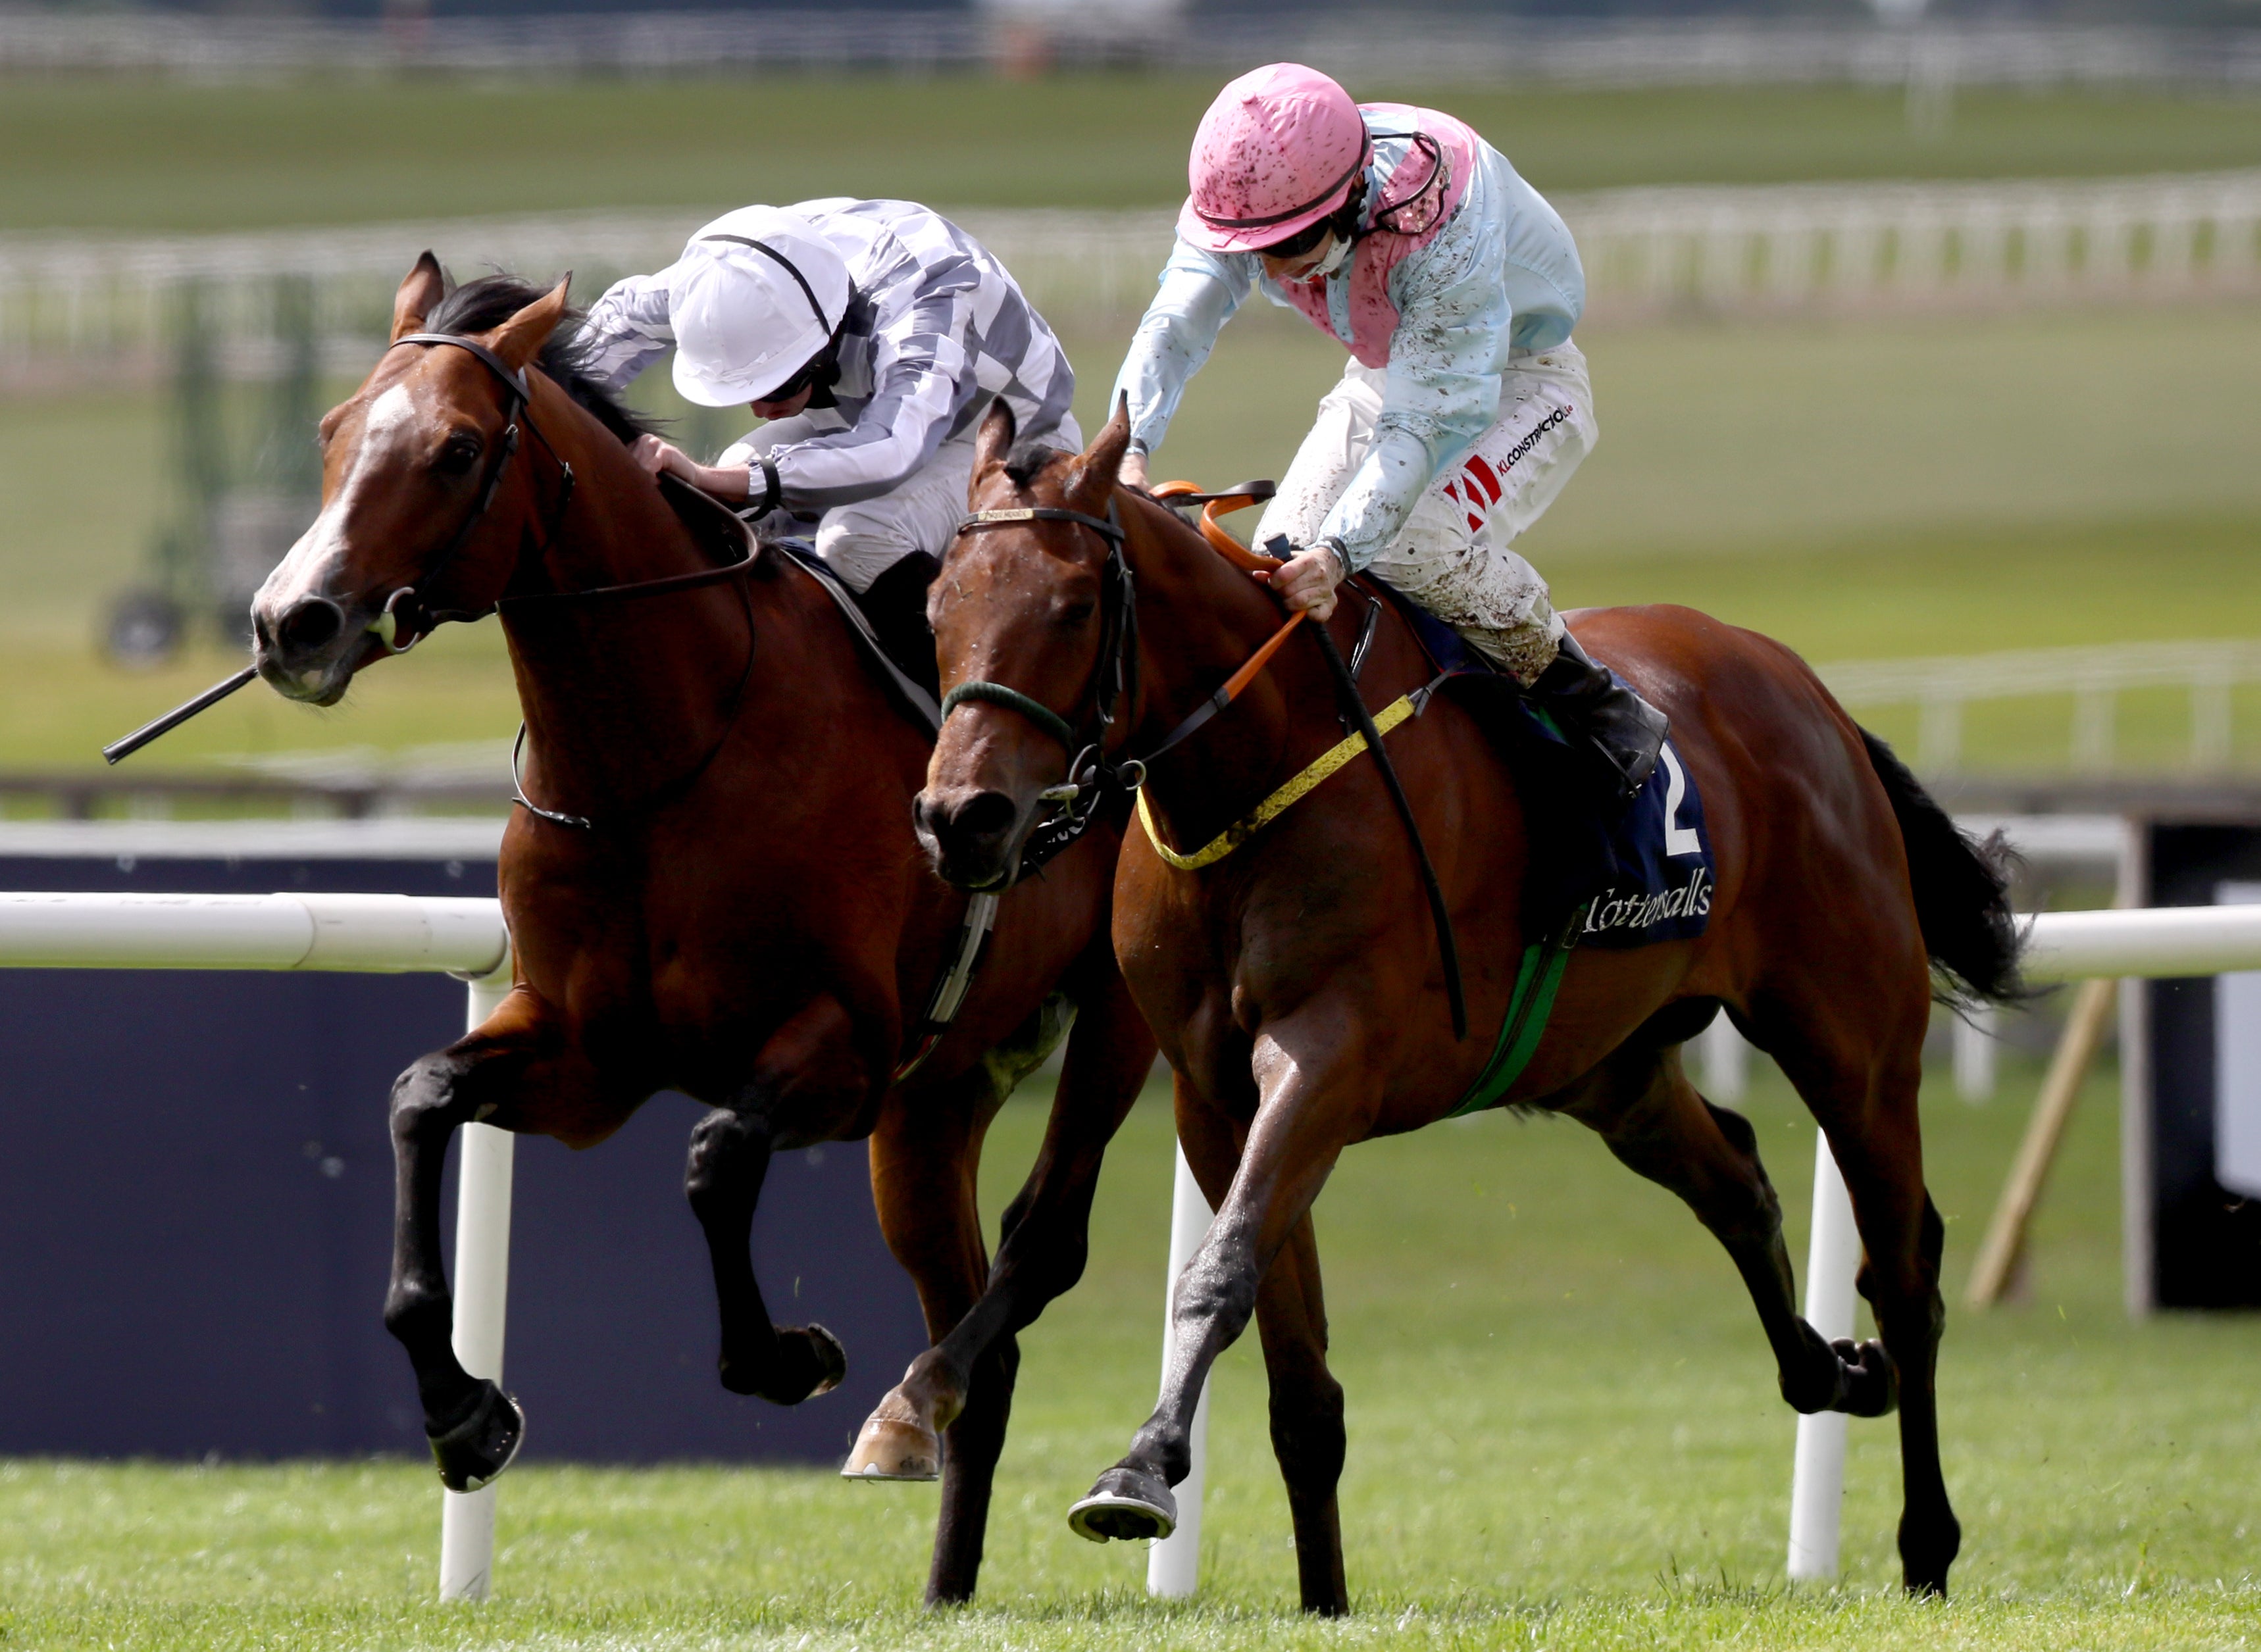 Helvic Dream (right) and Broome fight out the finish of the Tattersalls Gold Cup